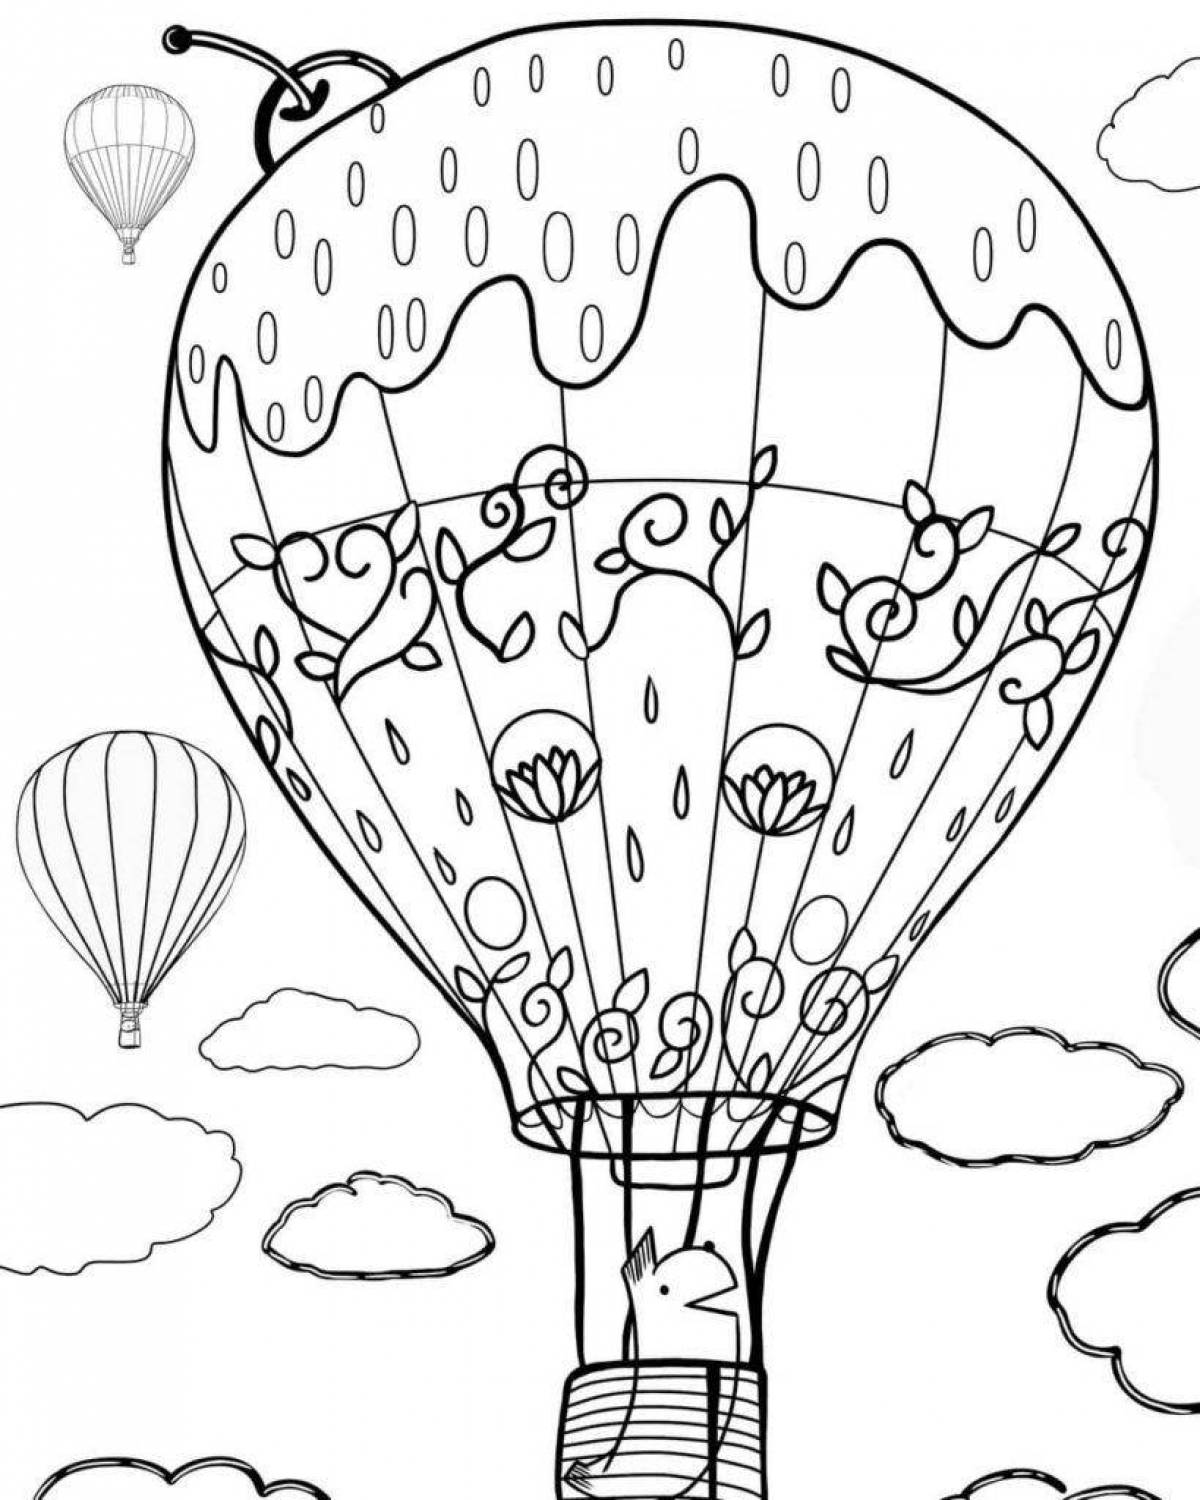 Lively coloring page with balloons for kids